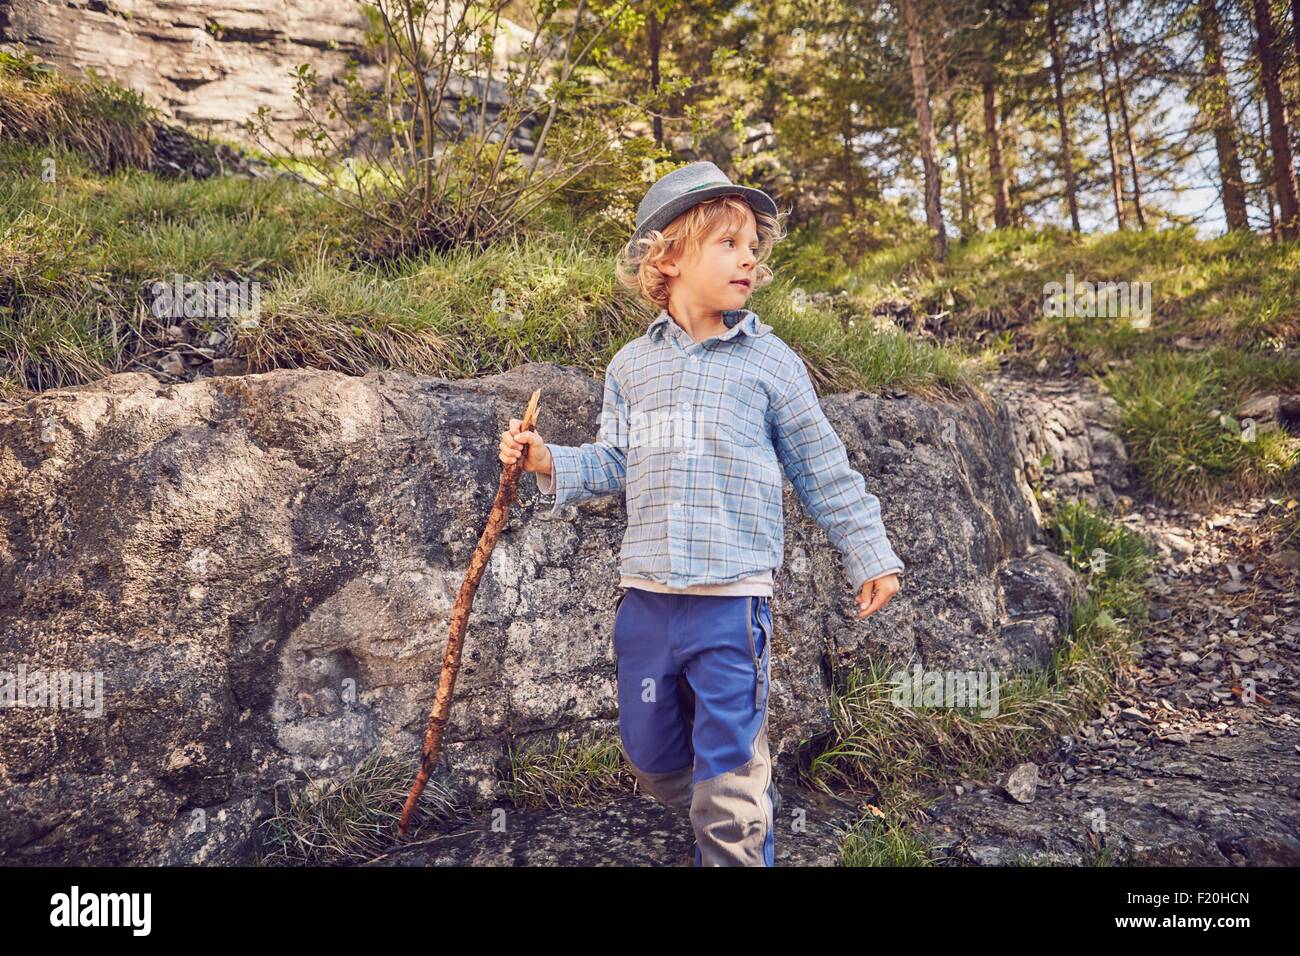 One young boy, holding stick, exploring forest Stock Photo